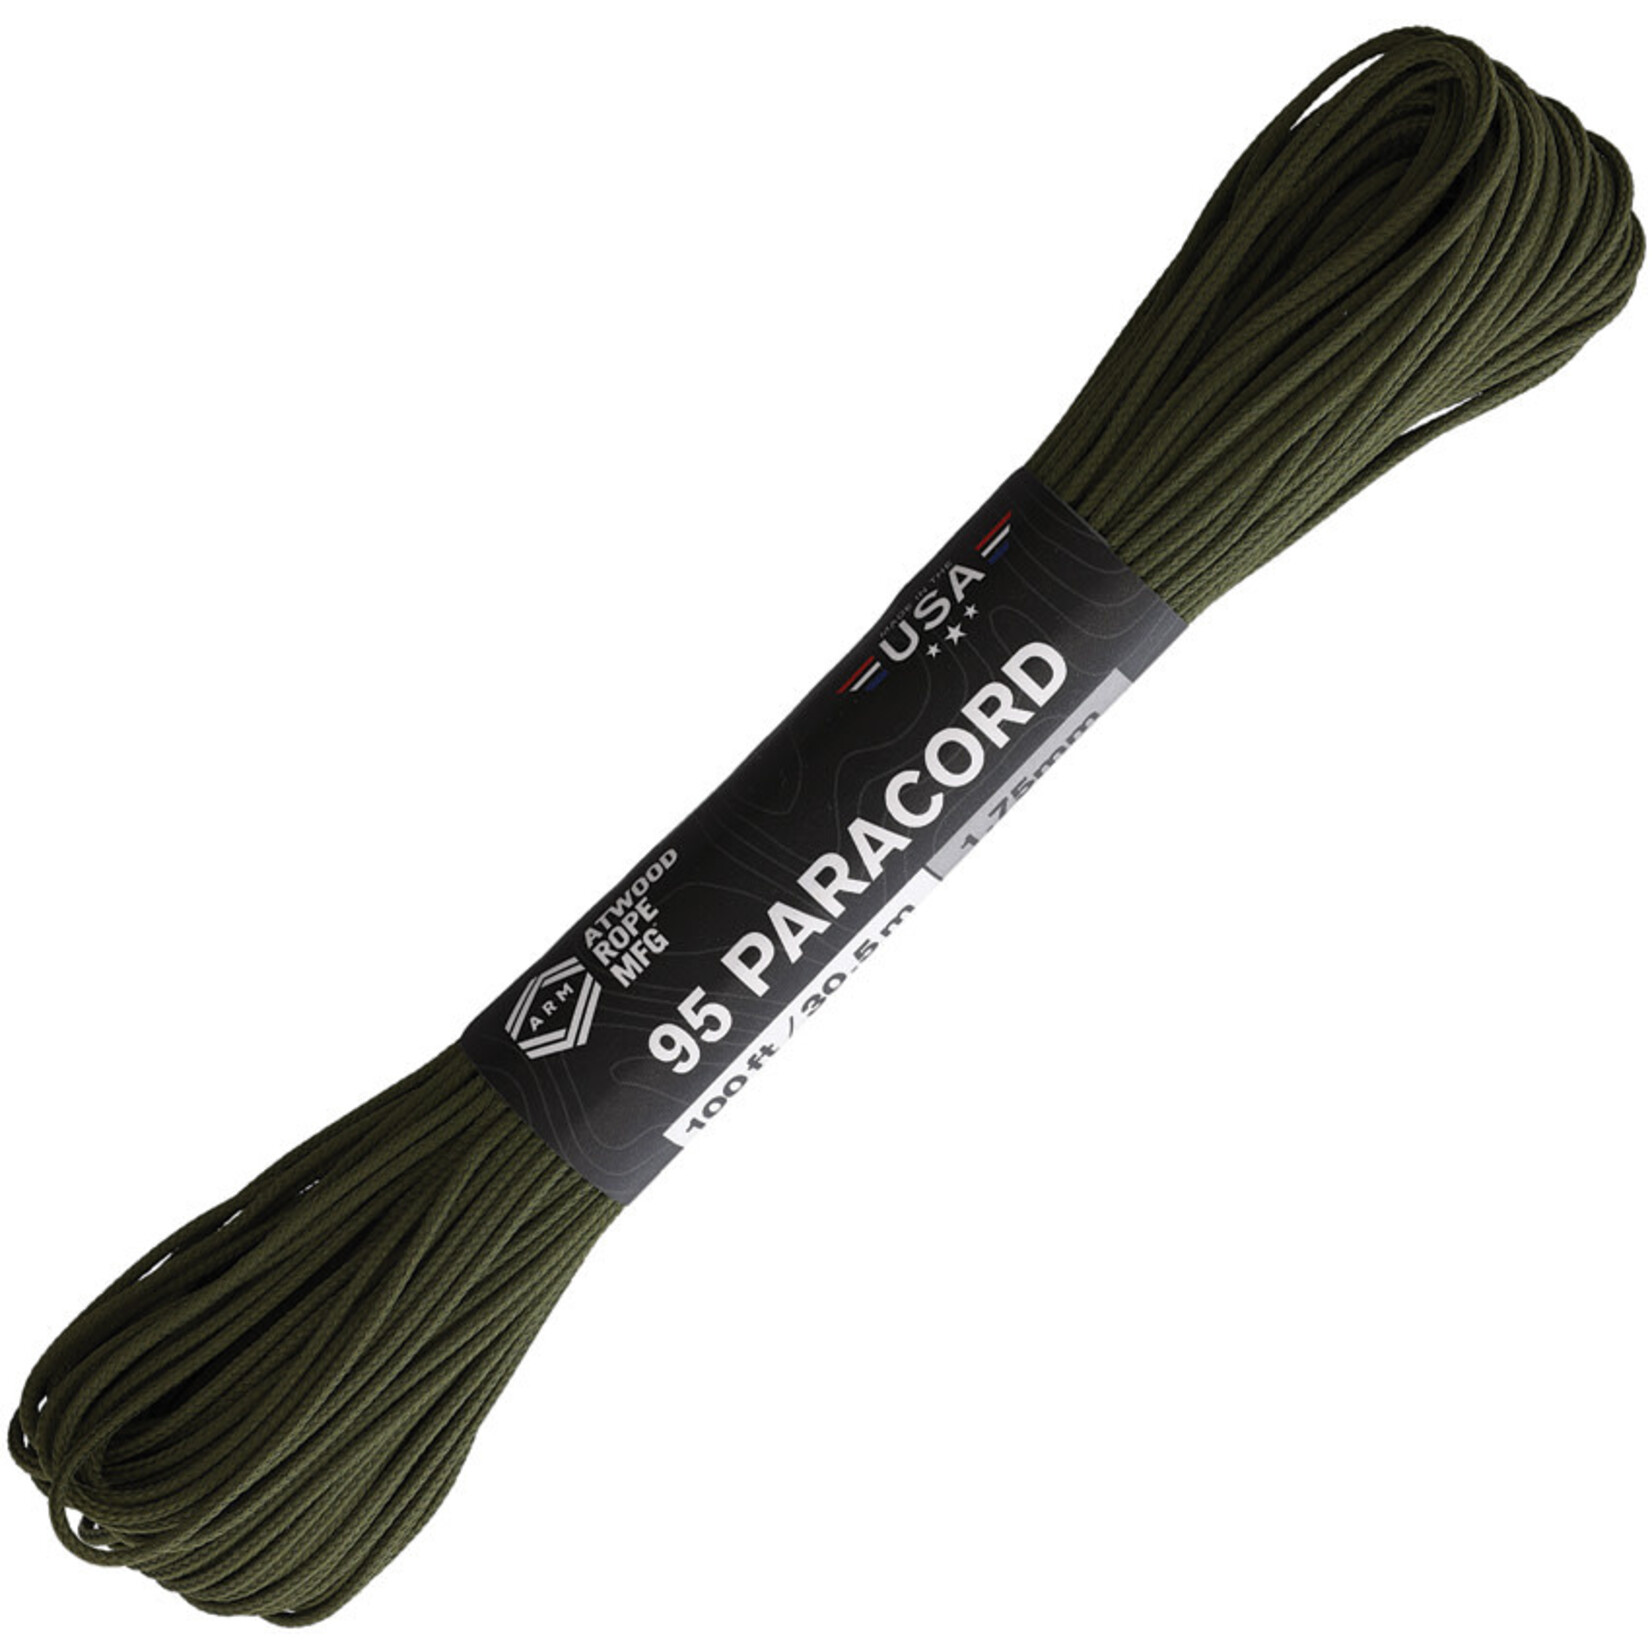 Atwood Rope Atwood Type 95 Paracord 100ft Hank - 5/64" (1.75mm)